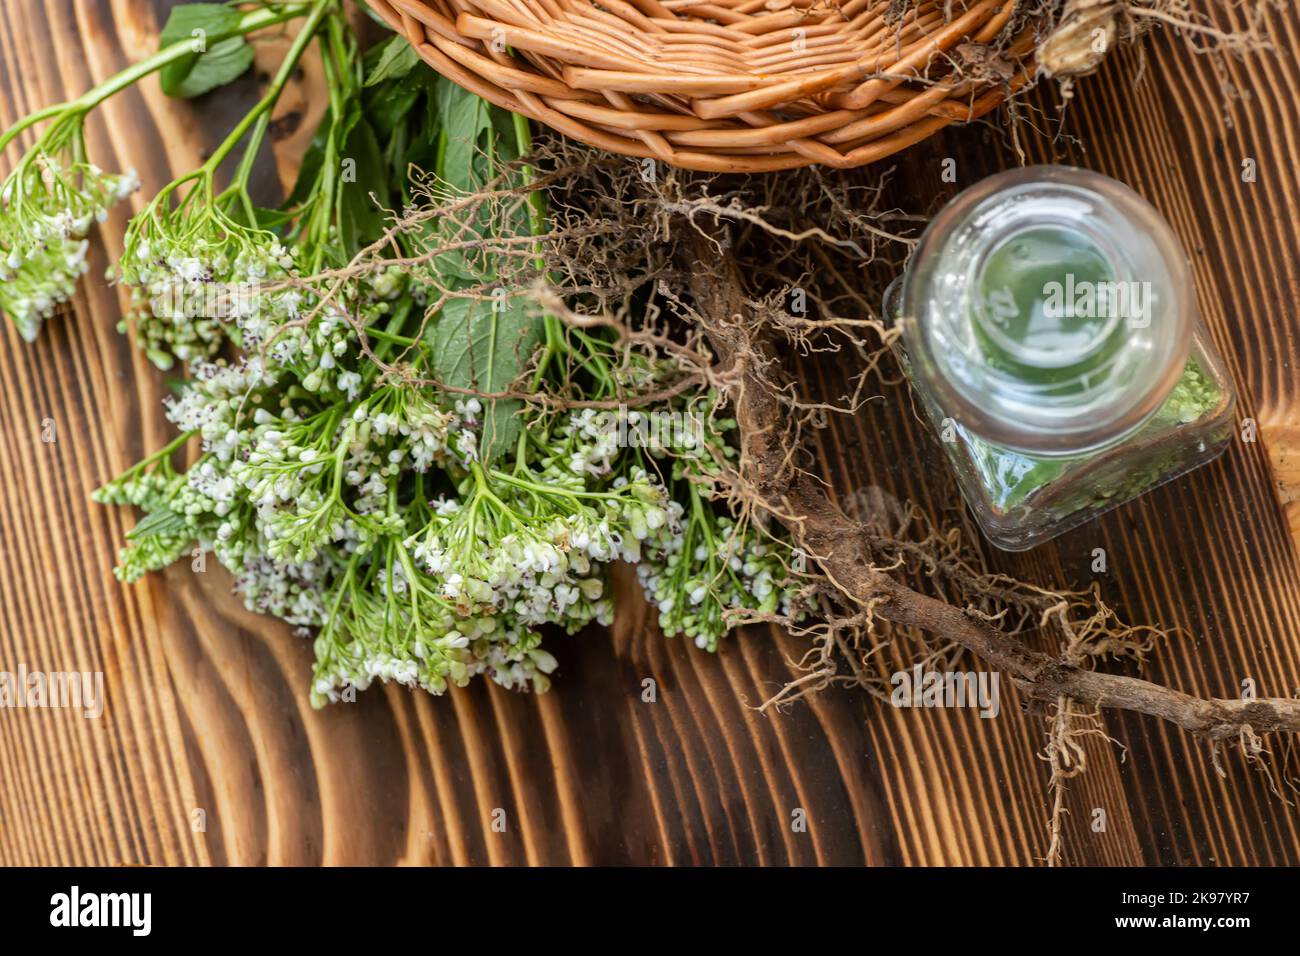 Dried rhizomes and roots of valerian medicinal. Transparent jar with fresh valerian flowers. Ingredients for apothecary of natural herbal medicines Stock Photo